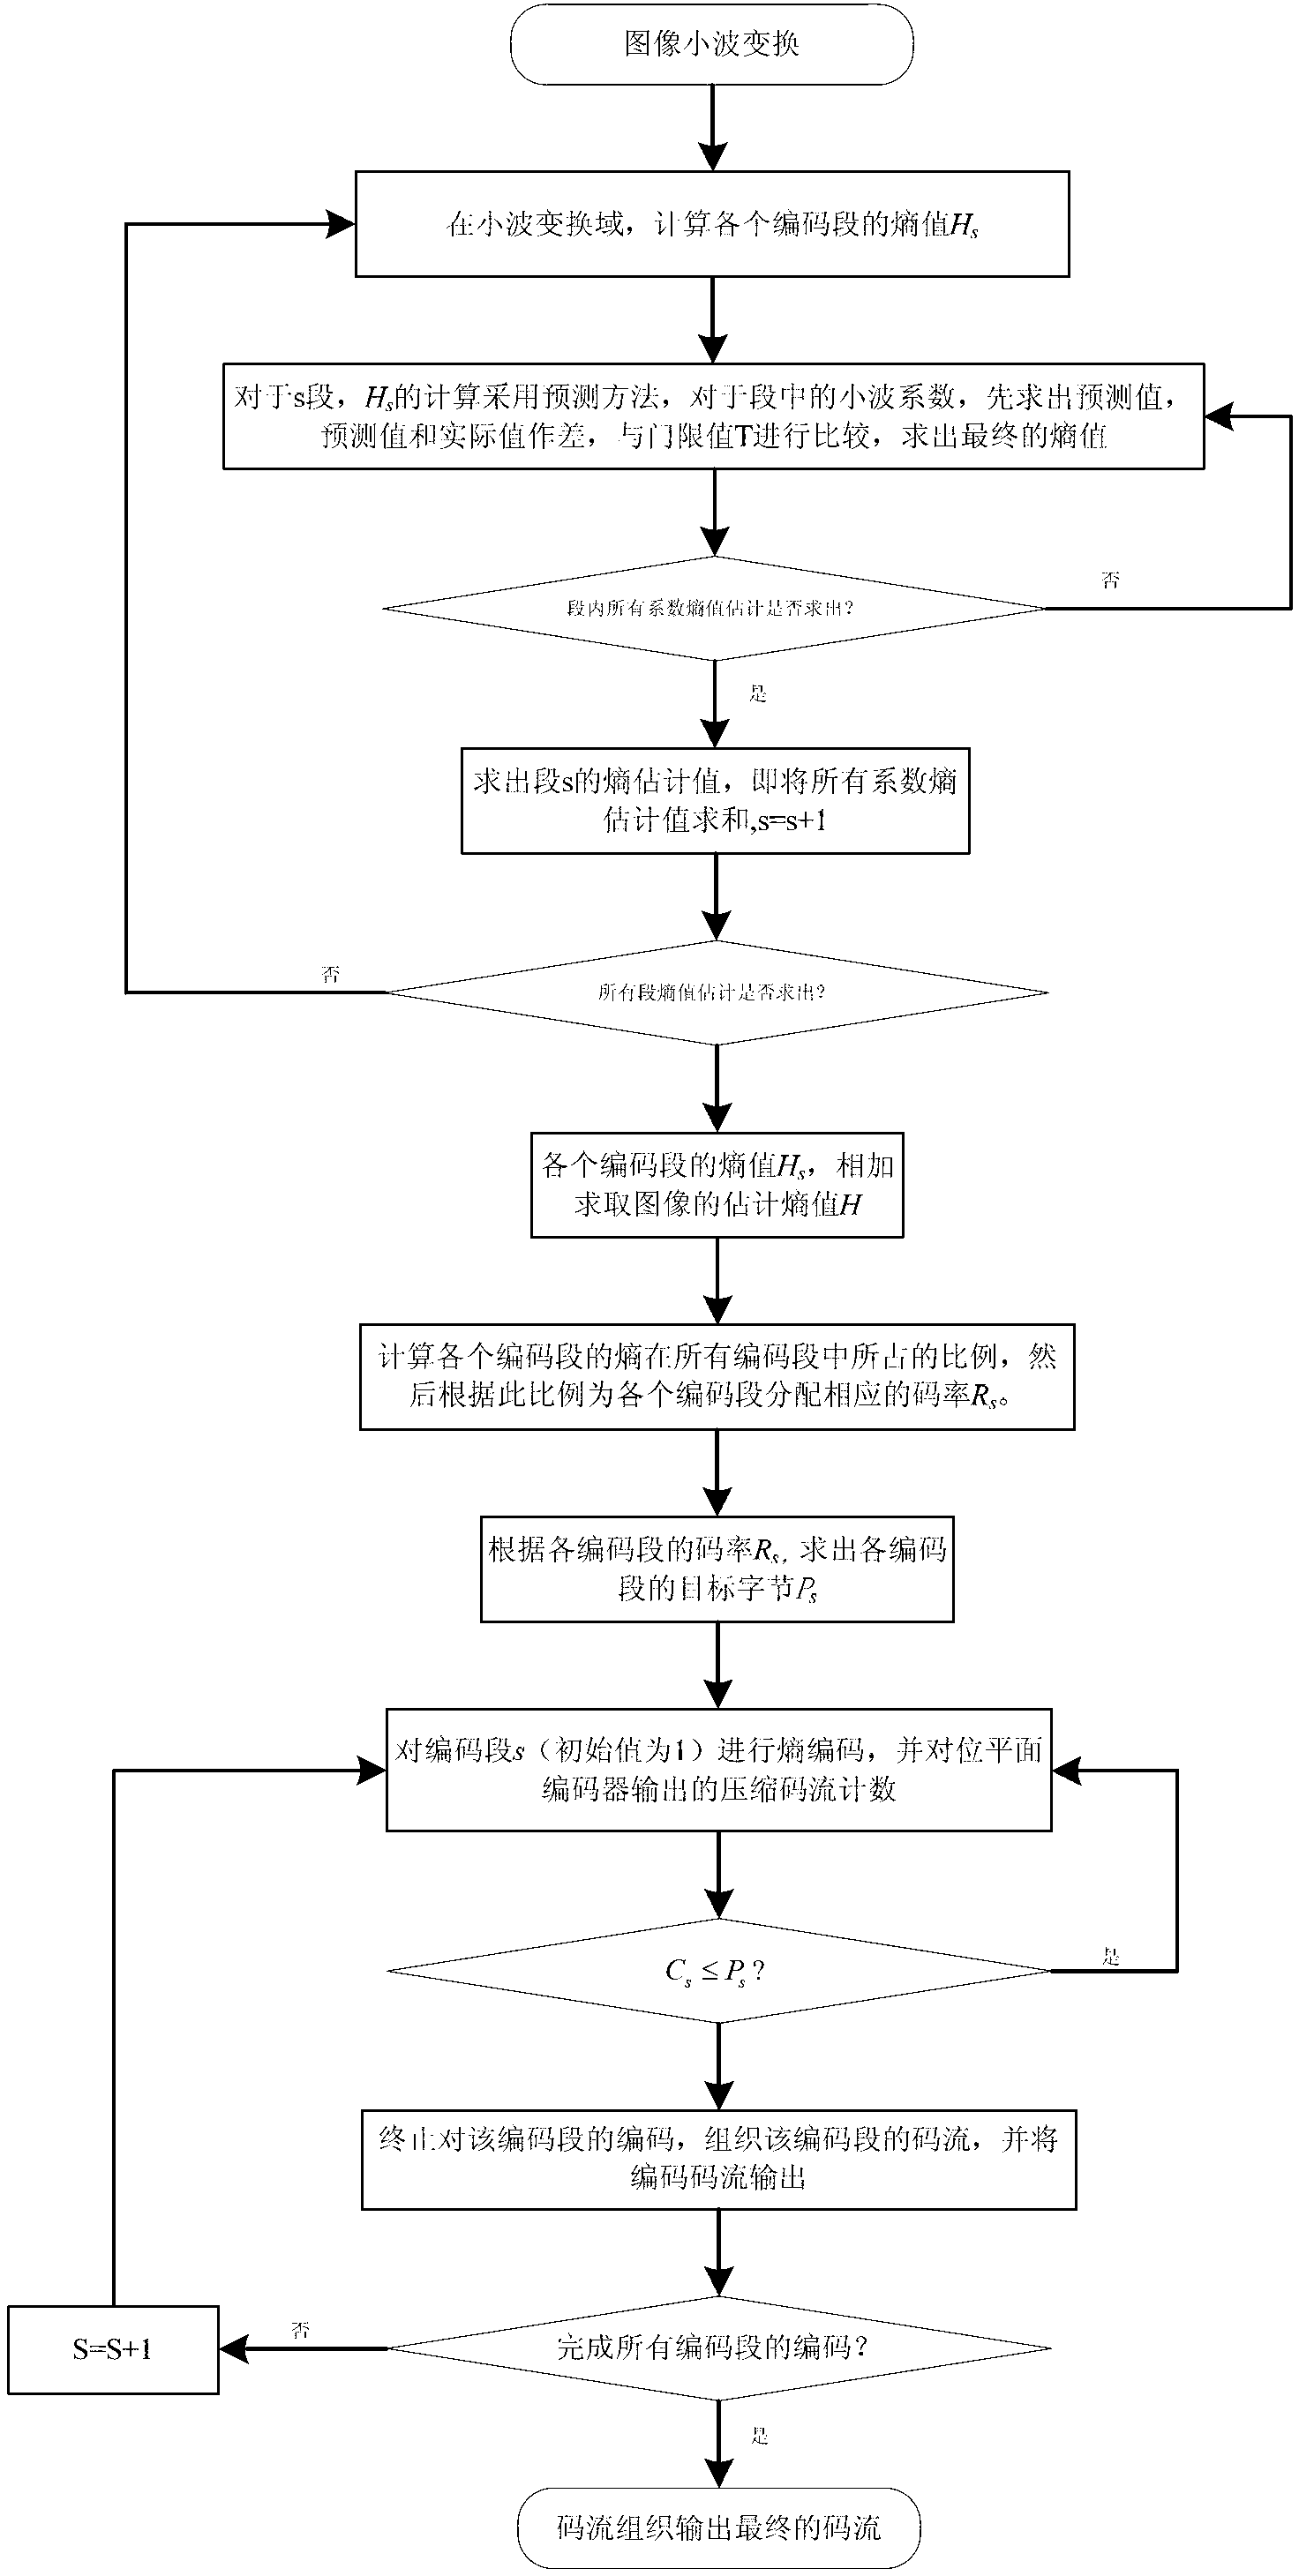 System and method for controlling CCSDS (consultative committee for space data system) image compressing code in spatial TDICCD (time delayed integration charge coupled device) camera application